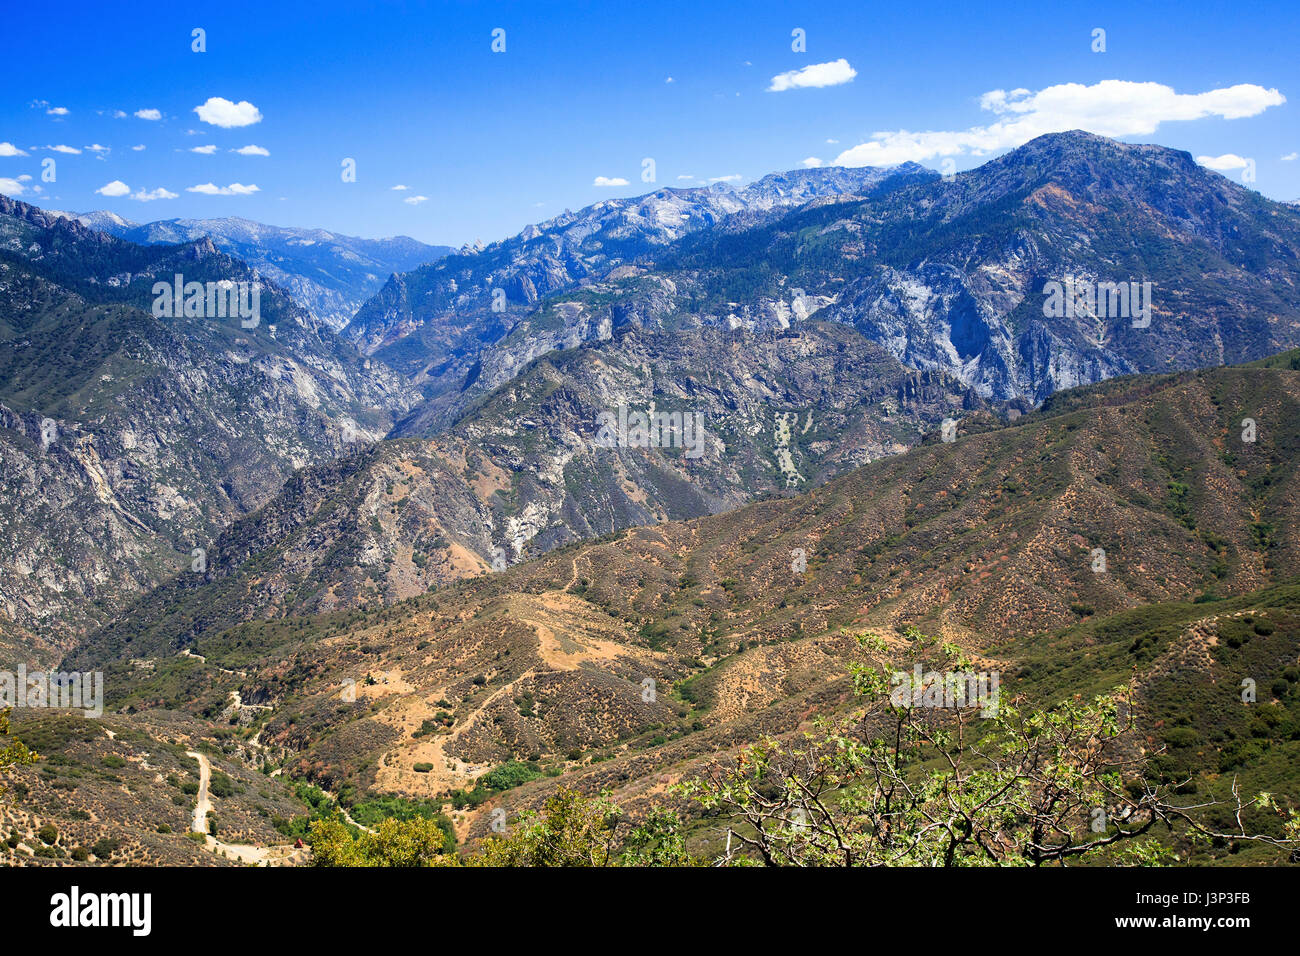 A view of mountain ranges from King's canyon national park Stock Photo